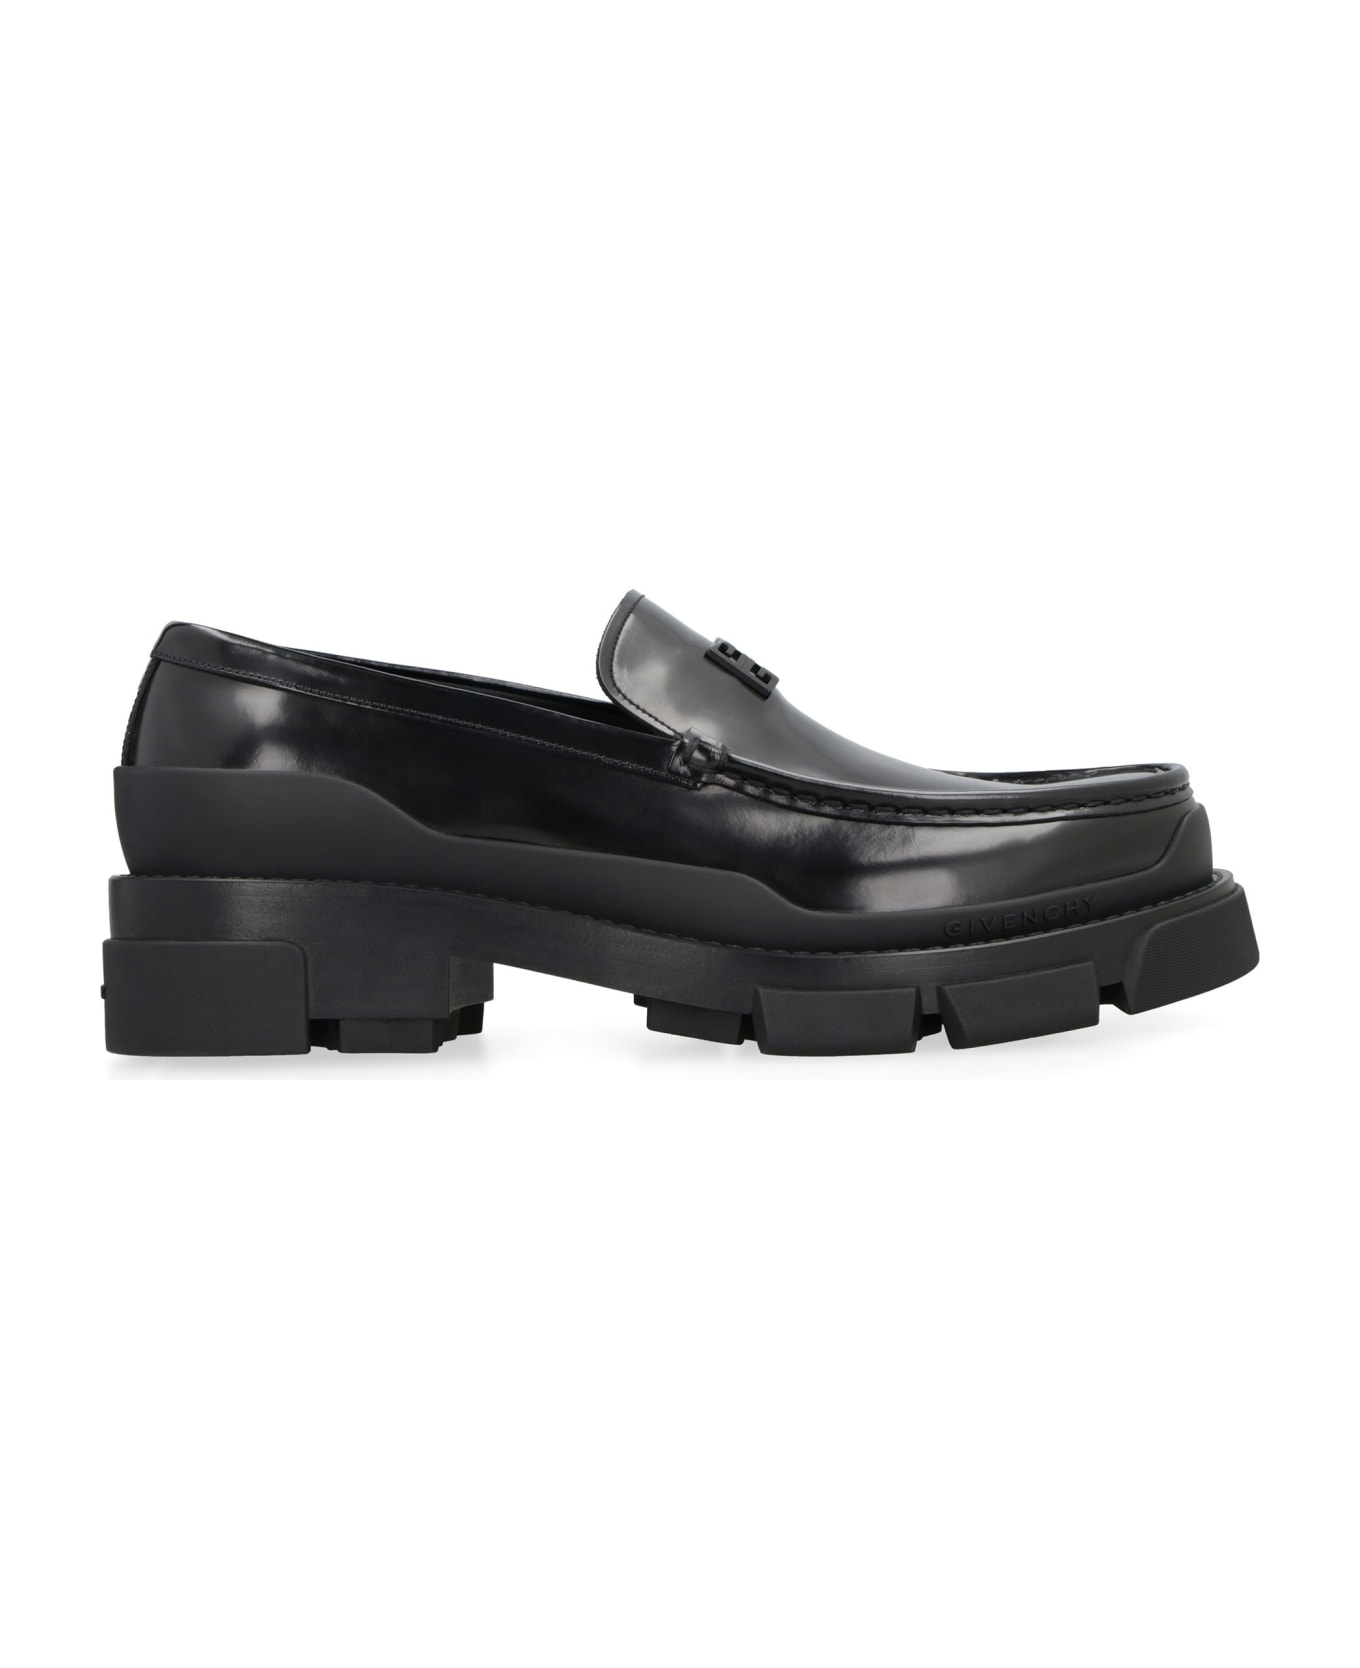 Givenchy Terra Leather Loafers - BLACK